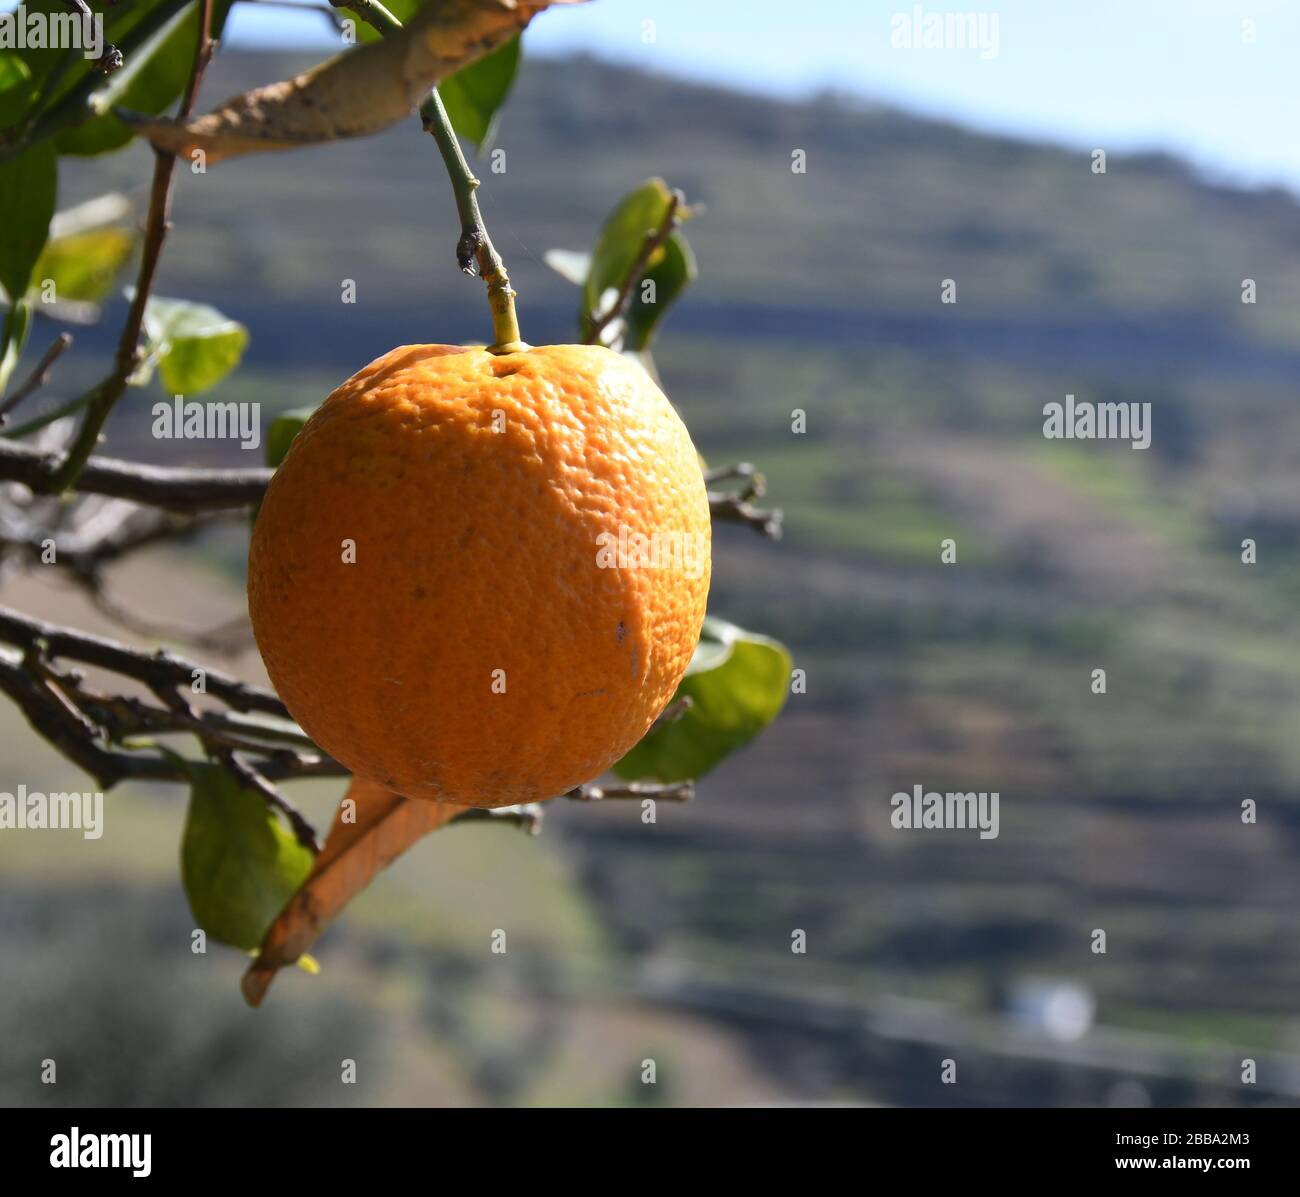 Peso Da RéGua, Portugal. 7th Mar, 2020. Luscious oranges grow at the Quinta Seara D'Ordens vineyard in the Douro River valley, Peso da Régua, Portugal, March 7, 2020. The family-owned business, which dates to 1792, is known for its port wine. Credit: Mark Hertzberg/ZUMA Wire/Alamy Live News Stock Photo